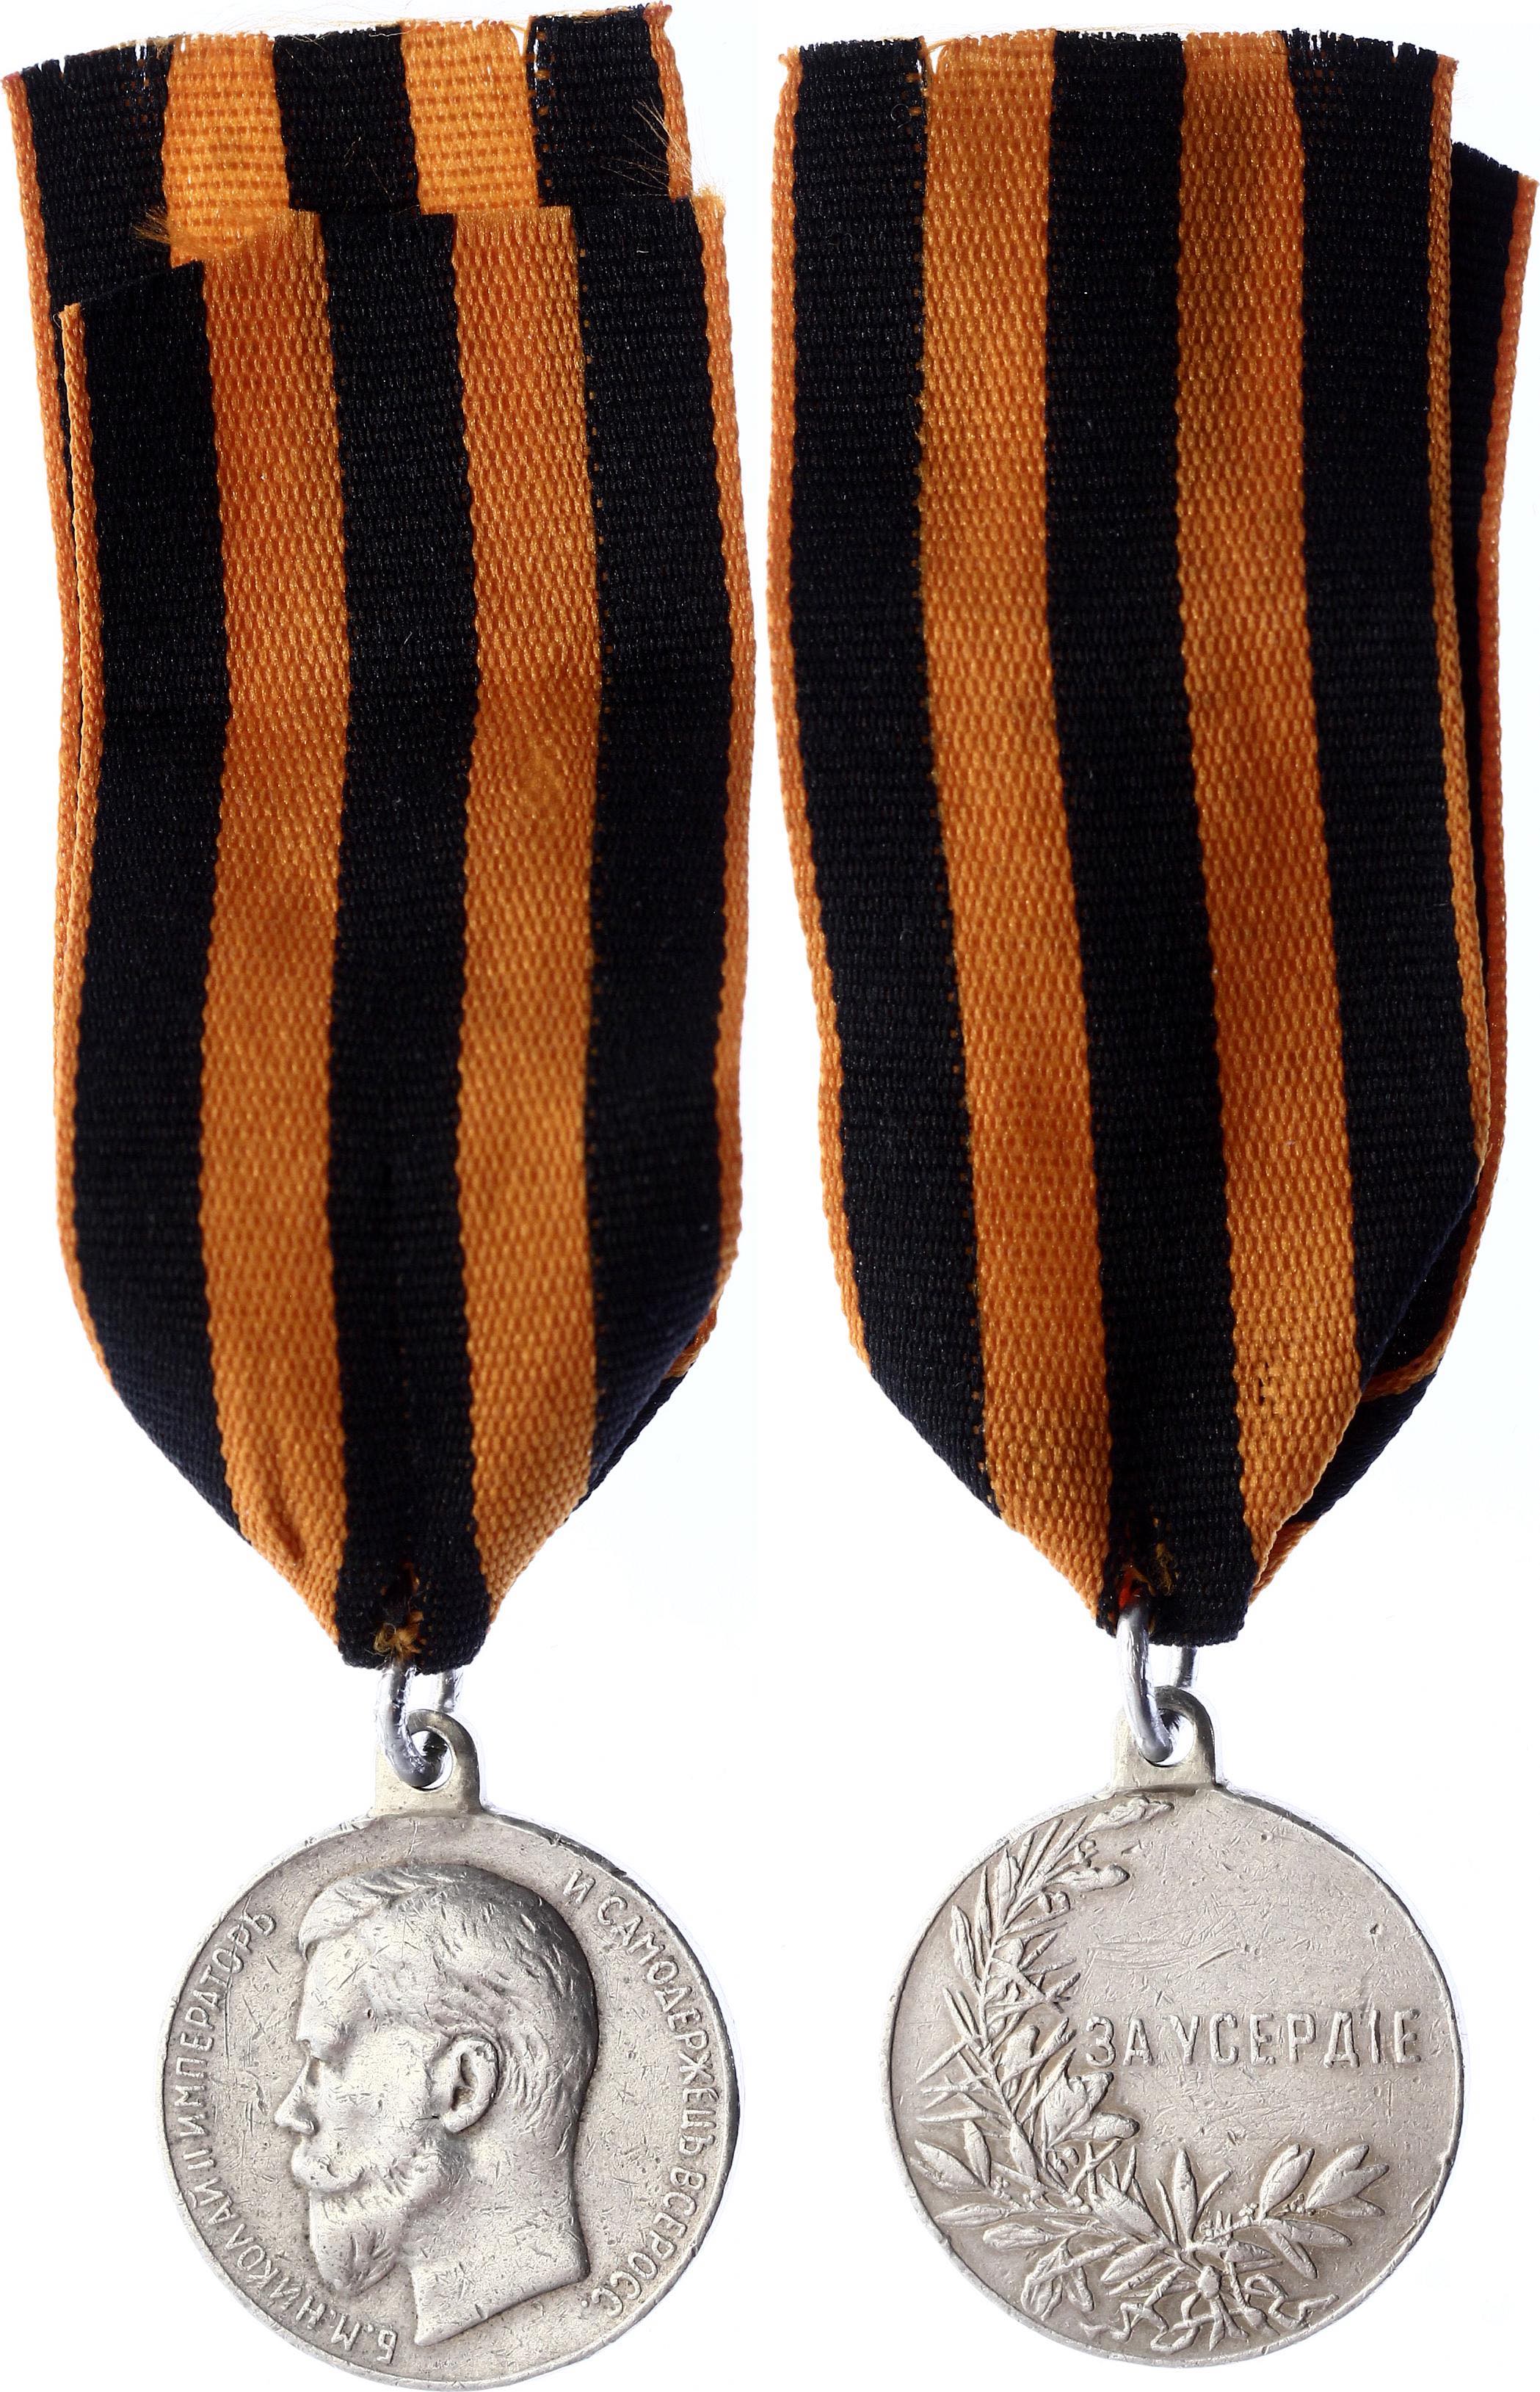 Russia Medal For Diligence